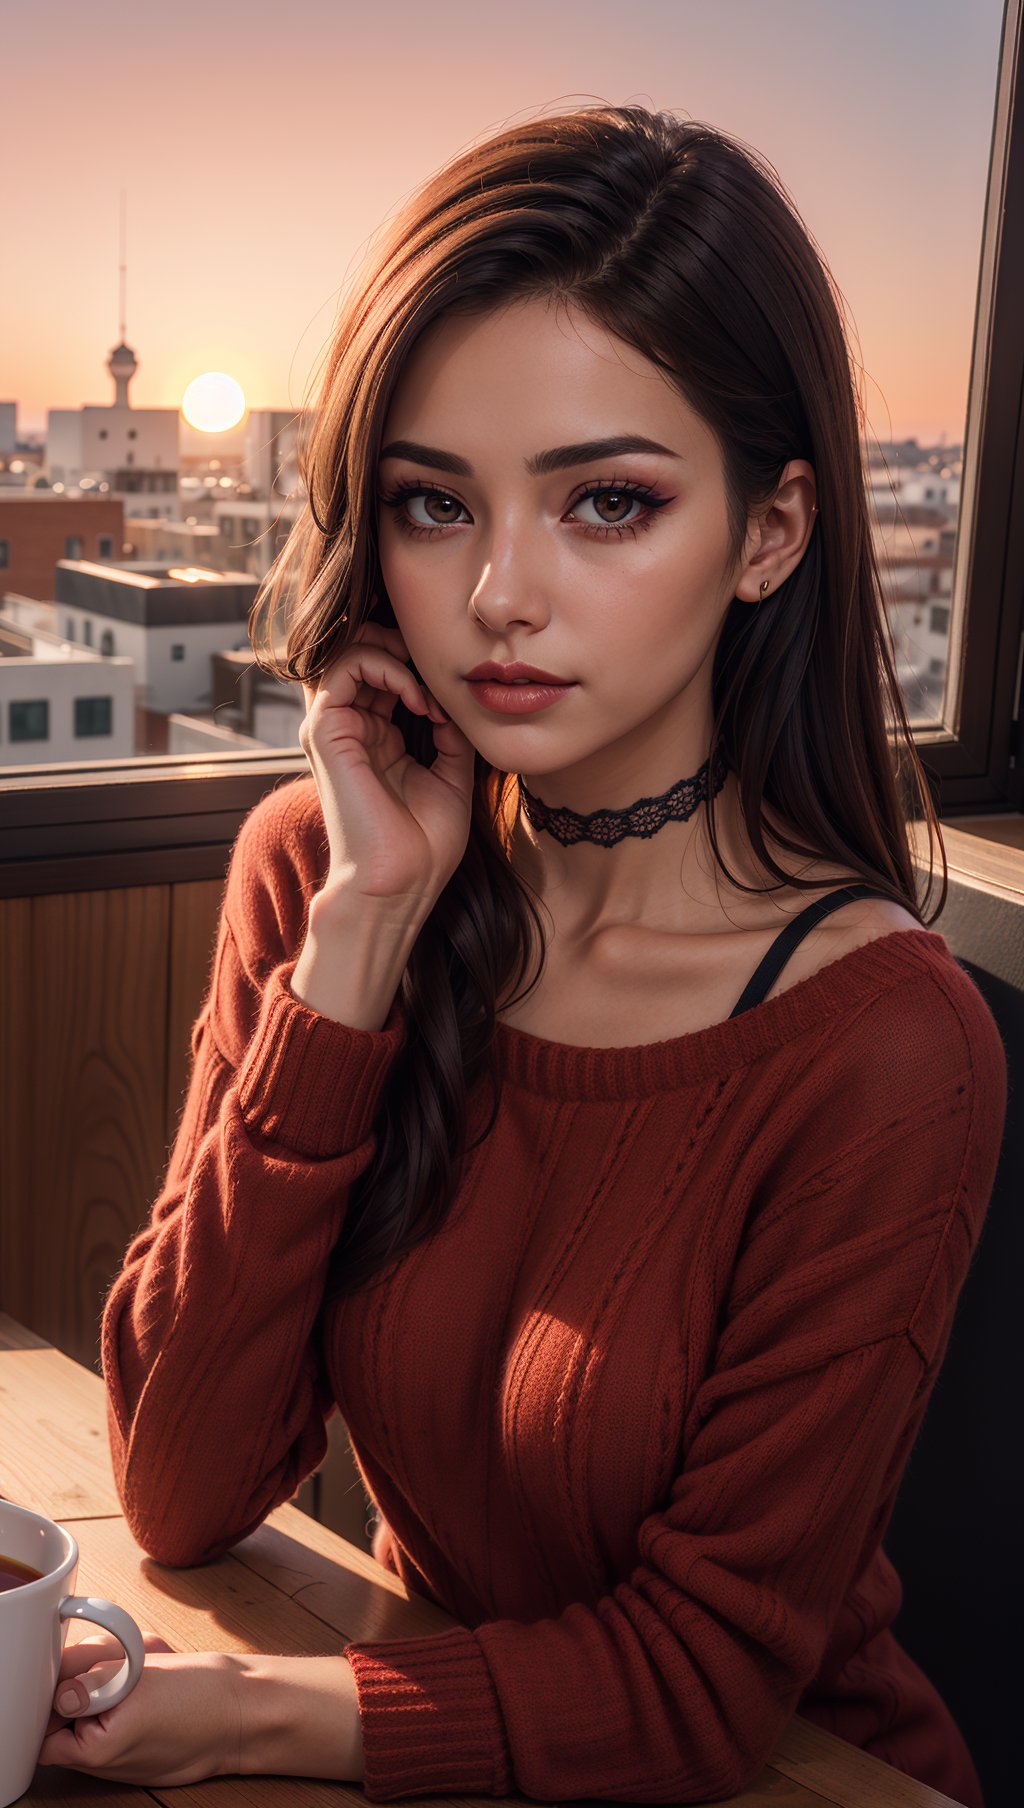 1 young cute iranian girl,very slim,skinny,redhead,rouge,red neck lace choker,cateyes makeup,colorful,oversize knit jumper,softcore,warm lighting,cosy atmosphere,Instagram style,red theme,upper body shot,(cinematic, black and red:0.85),(sunset beautiful background:1.3),sharp,dim colors,